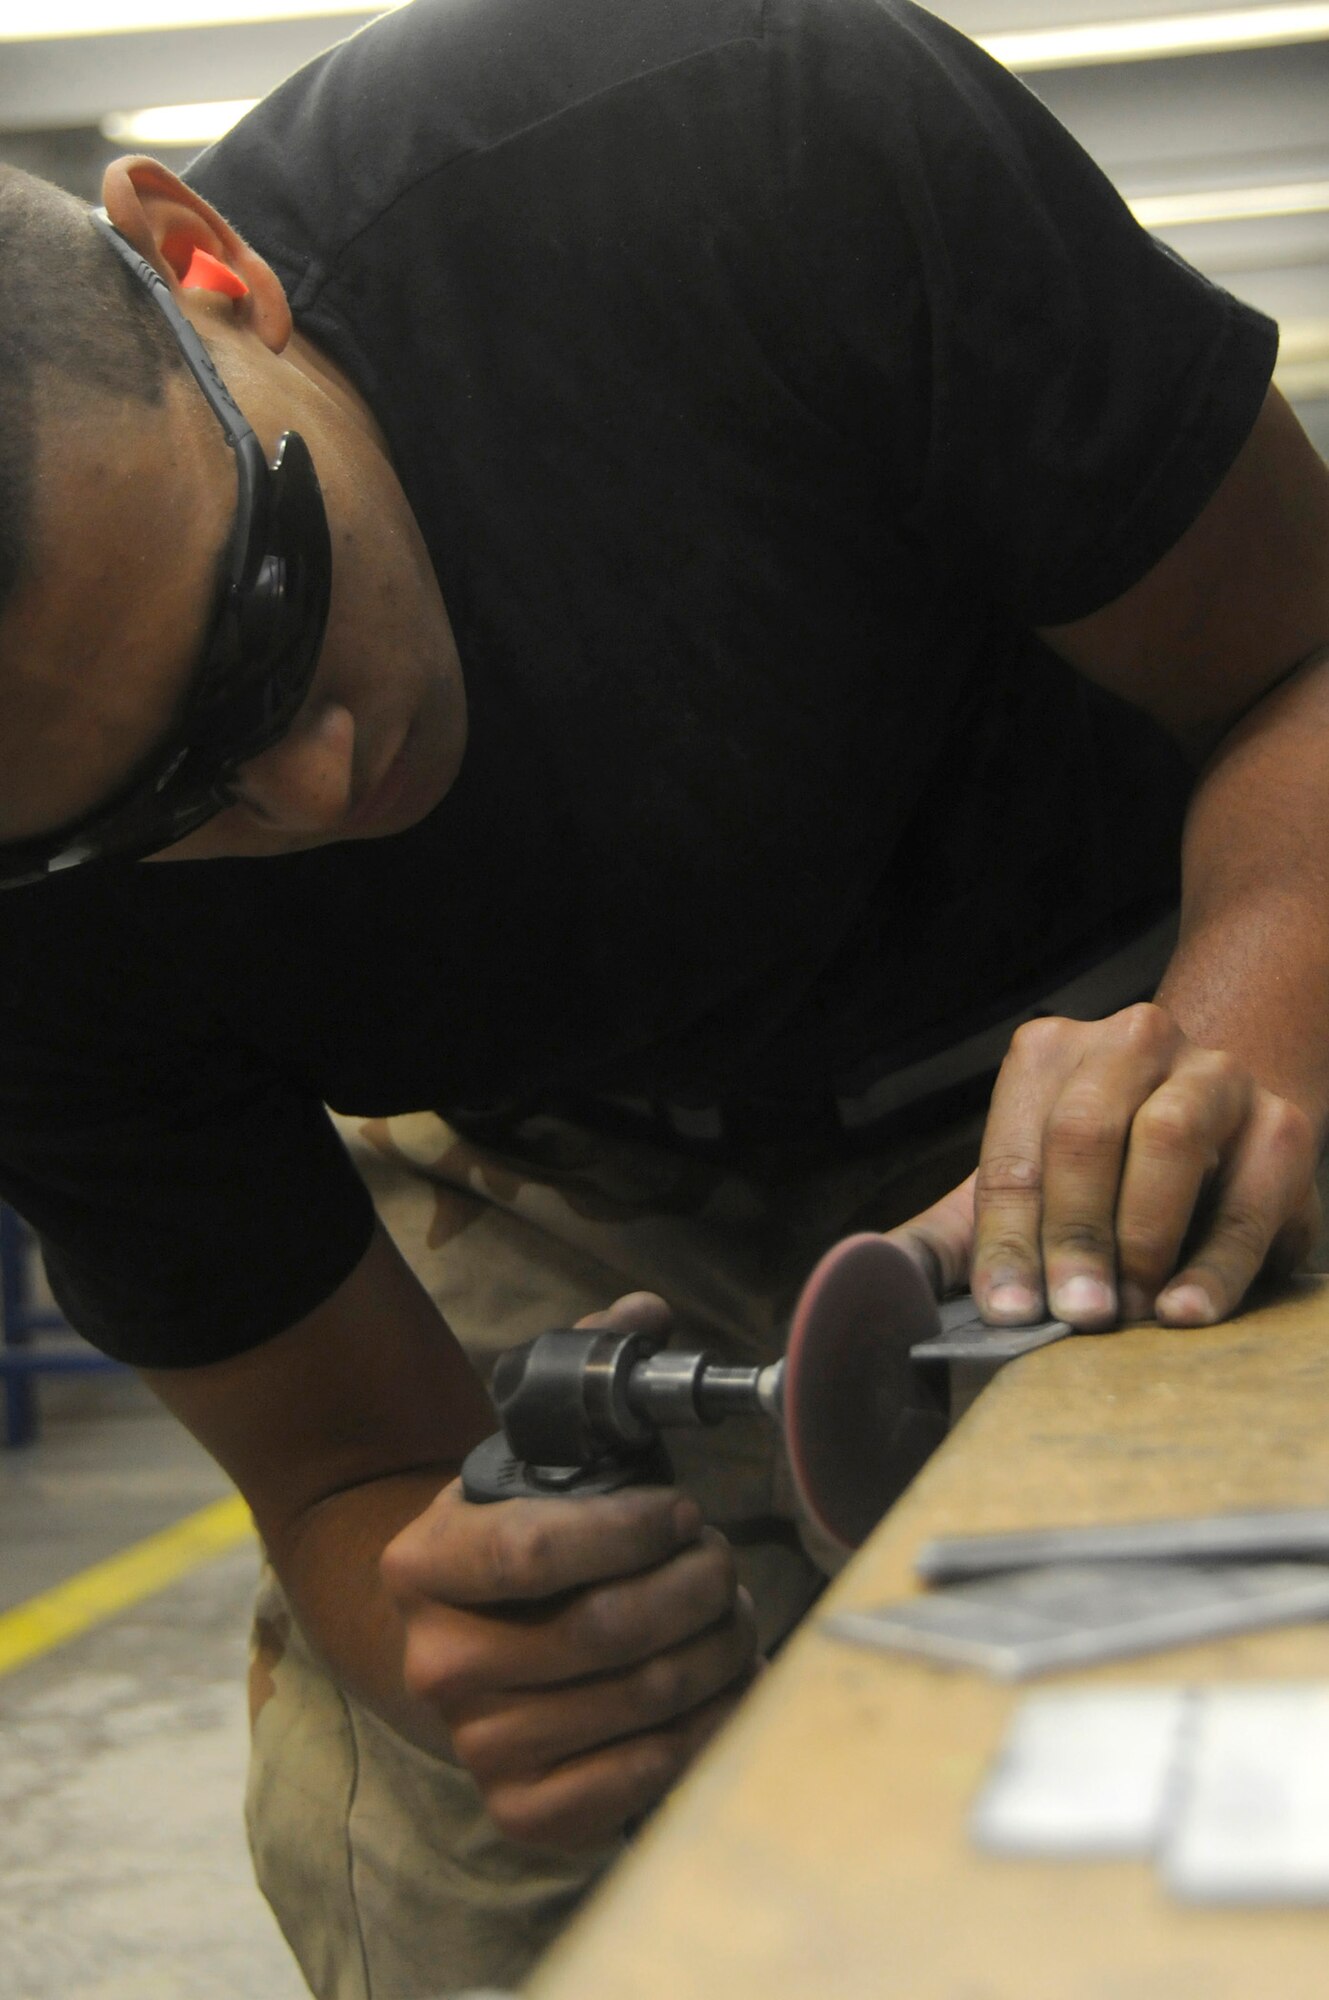 Airman 1st Class Jean-Michael Sibilly, structural aircraft maintainer assigned to the 379th Expeditionary Maintenance Squadron, uses a cutting wheel tube to make brackets fabrications for a B-1 aircraft Nov. 15, 2008, at an undisclosed air base in Southwest Asia. Airman Sibilly, a native of Charlotte Amalie, St. Thomas United States Virgin Island, is deployed from Ellsworth Air Force Base, S.D., in support of Operations Iraqi and Enduring Freedom and Joint Task Force-Horn of Africa. (U.S. Air Force photo by Staff Sgt. Darnell T. Cannady/Released)